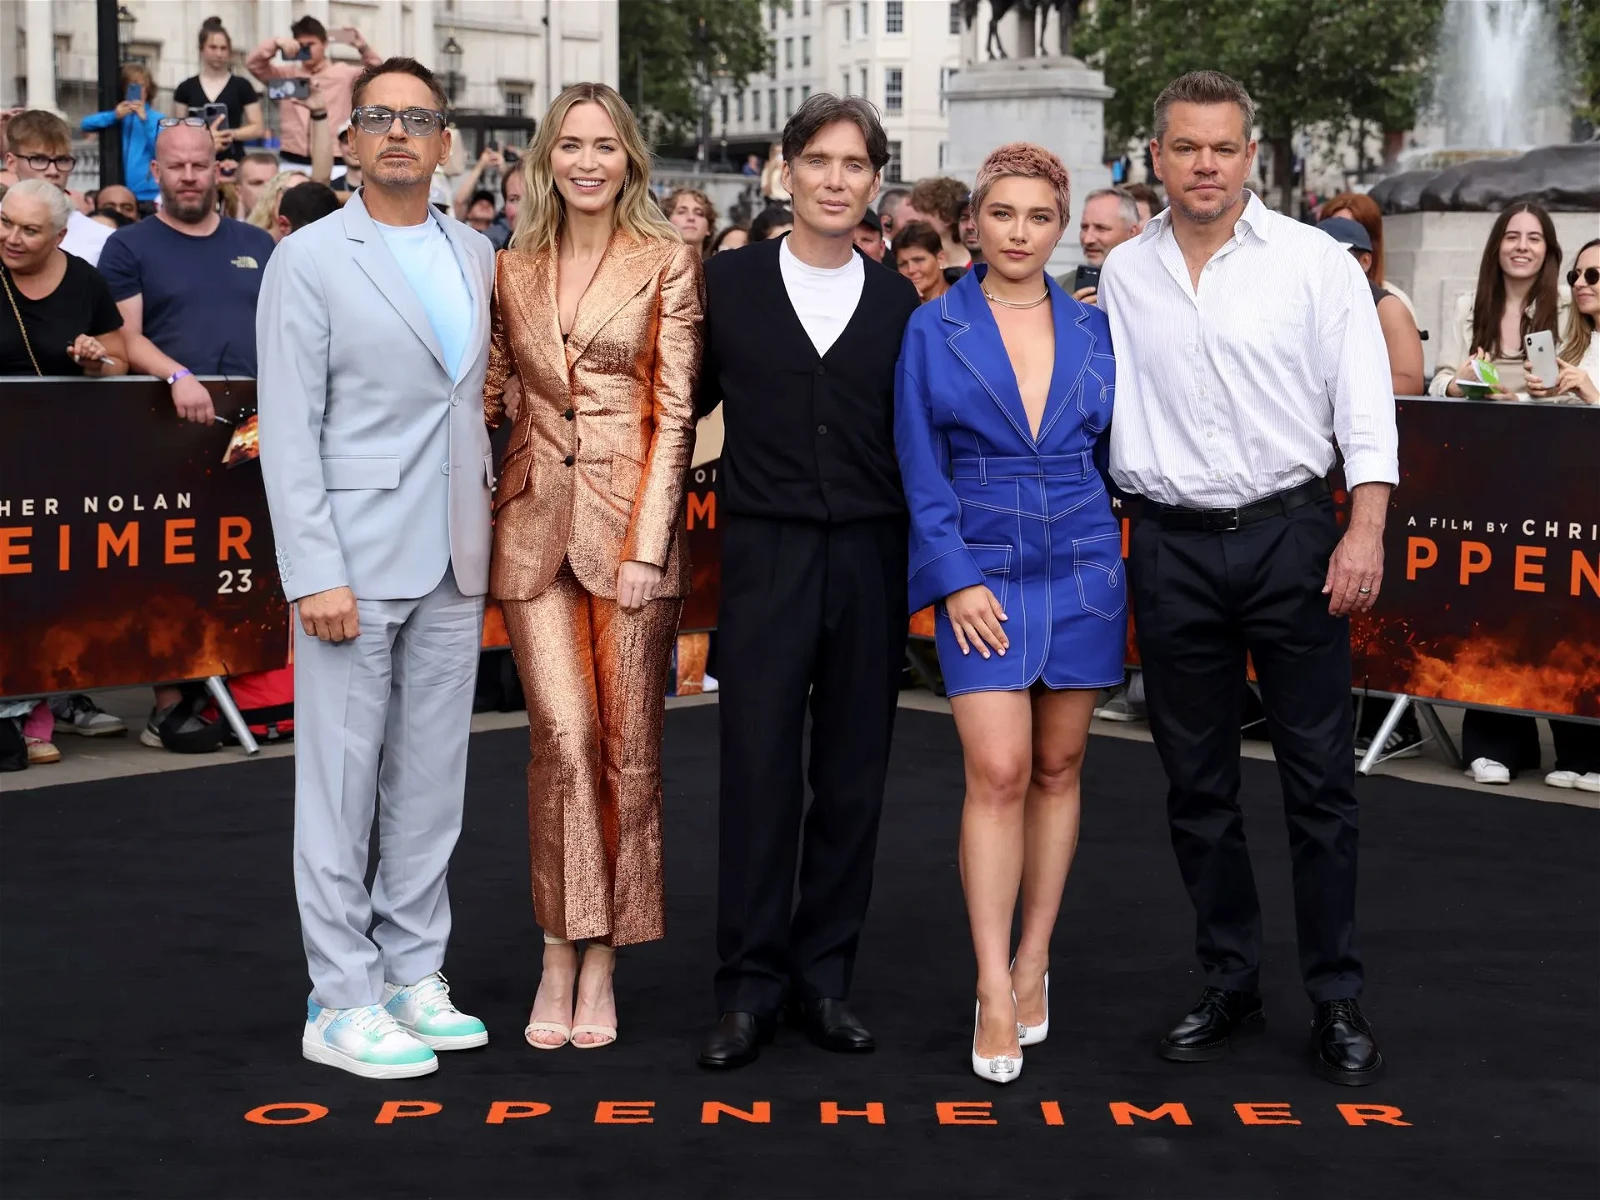 The Oppenheimer cast at its UK premiere